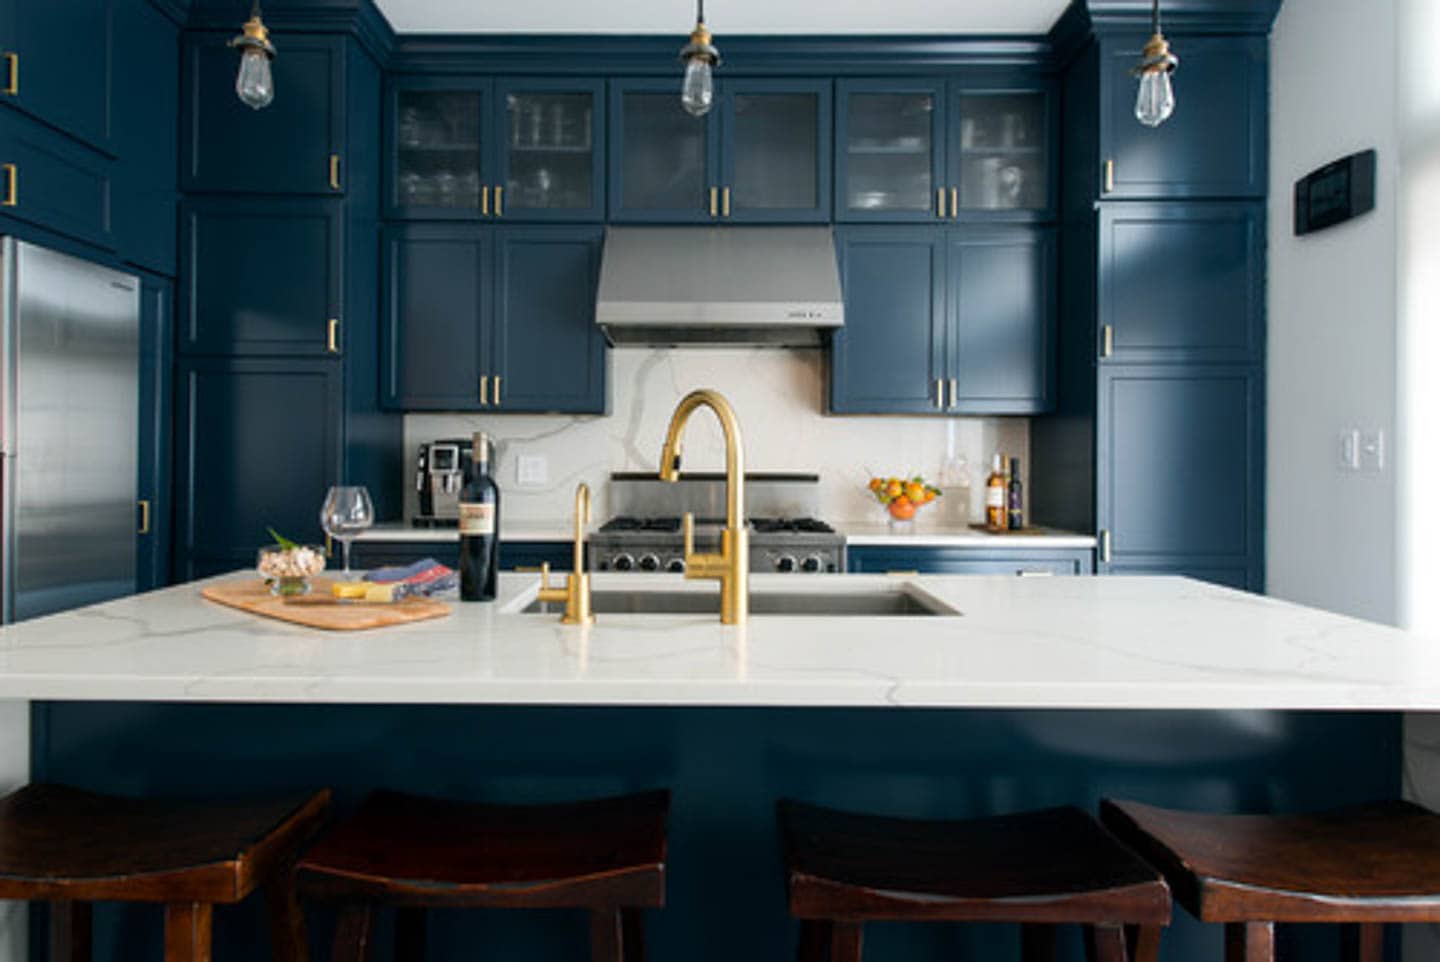 Kitchen with Hague Blue cabinets, white countertop and gold fixtures